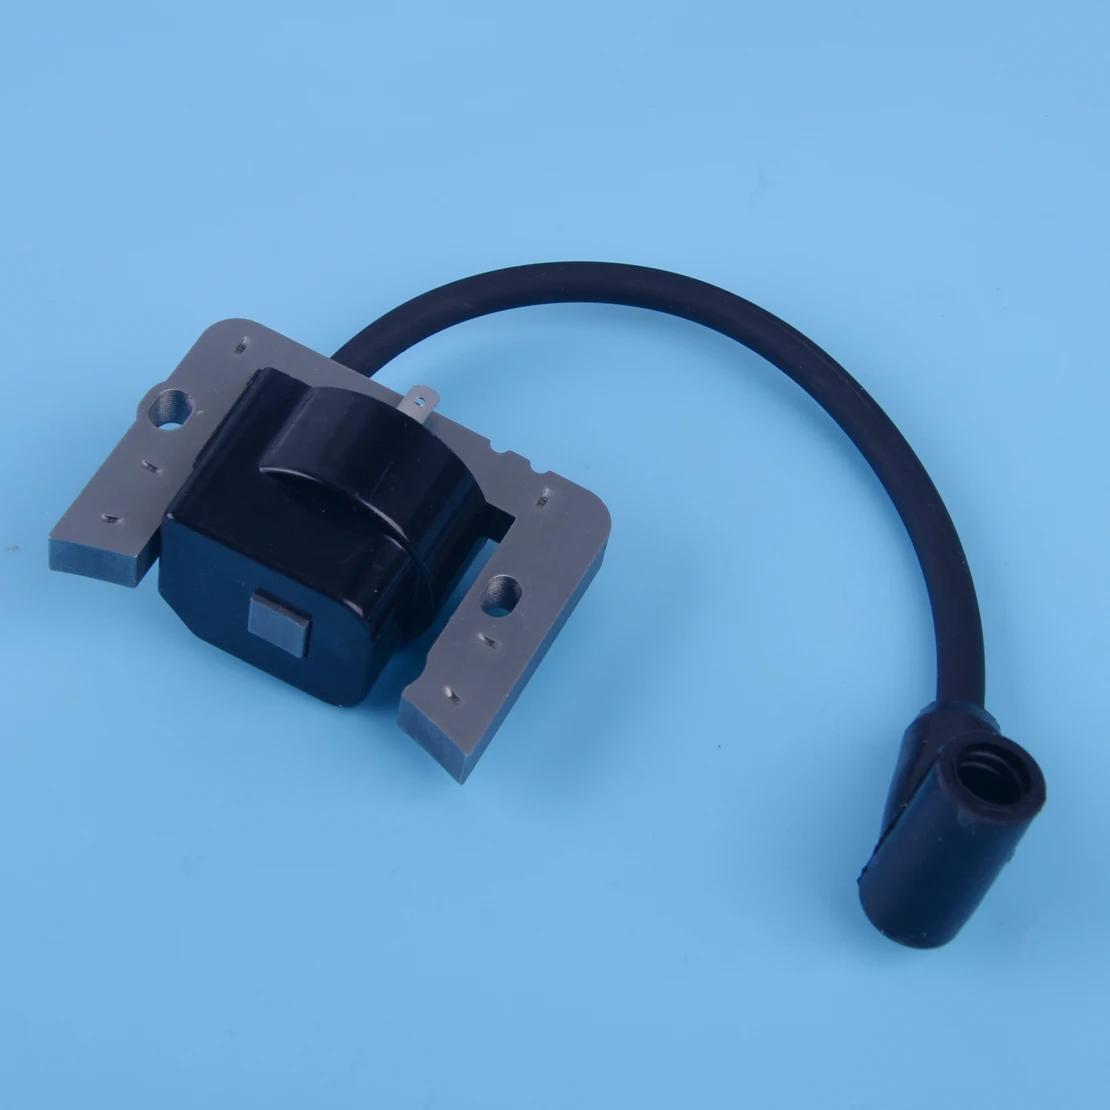 LETAOSK Ignition Coil Module Tool Fit For Tecumseh 35135 35135A 35135B HM70 HM80 HM90 HM100 Solid State